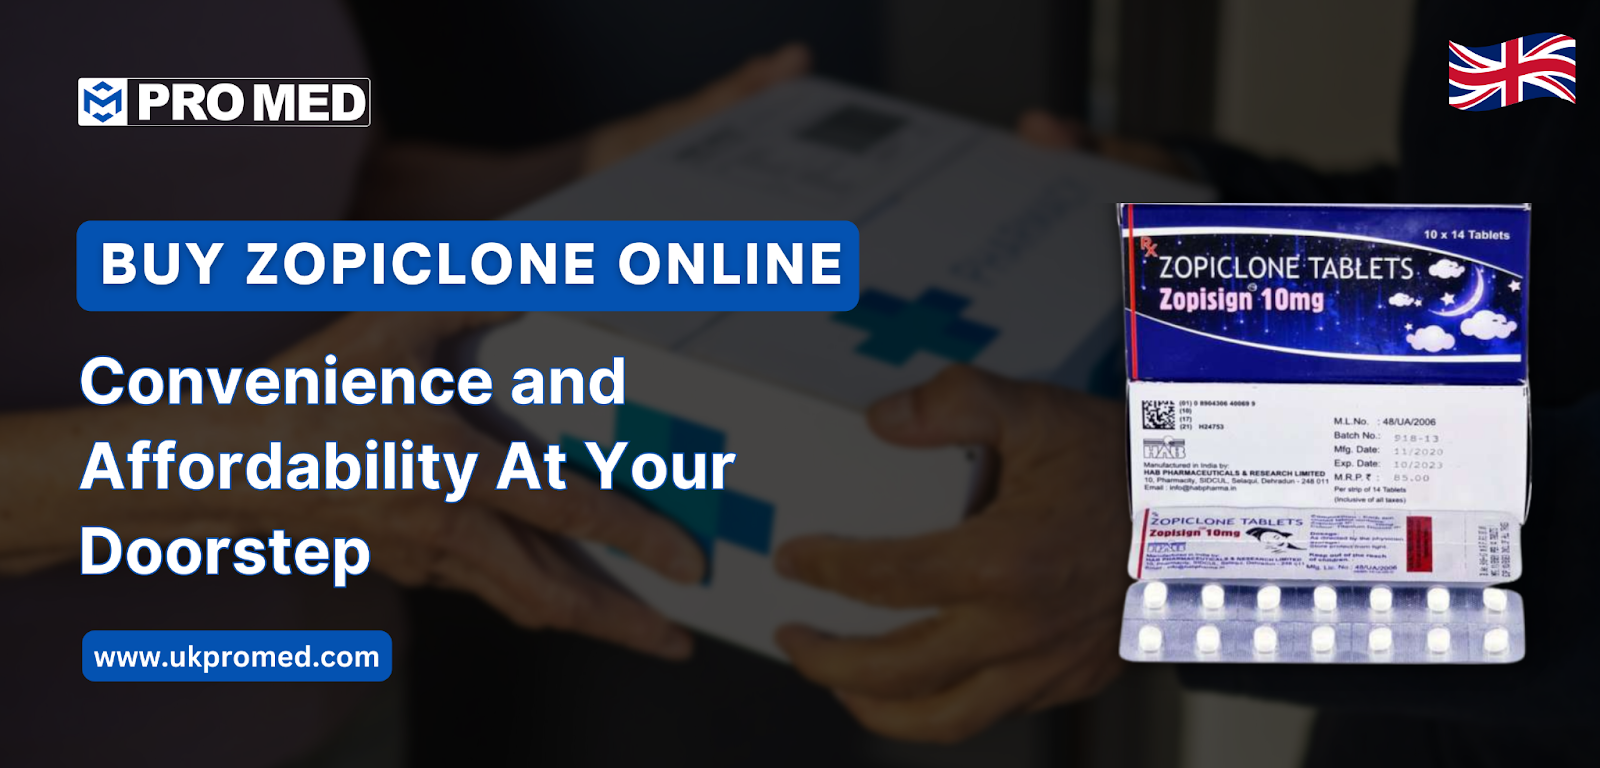 Buy Zopiclone Online: Convenience and Affordability At Your Doorstep